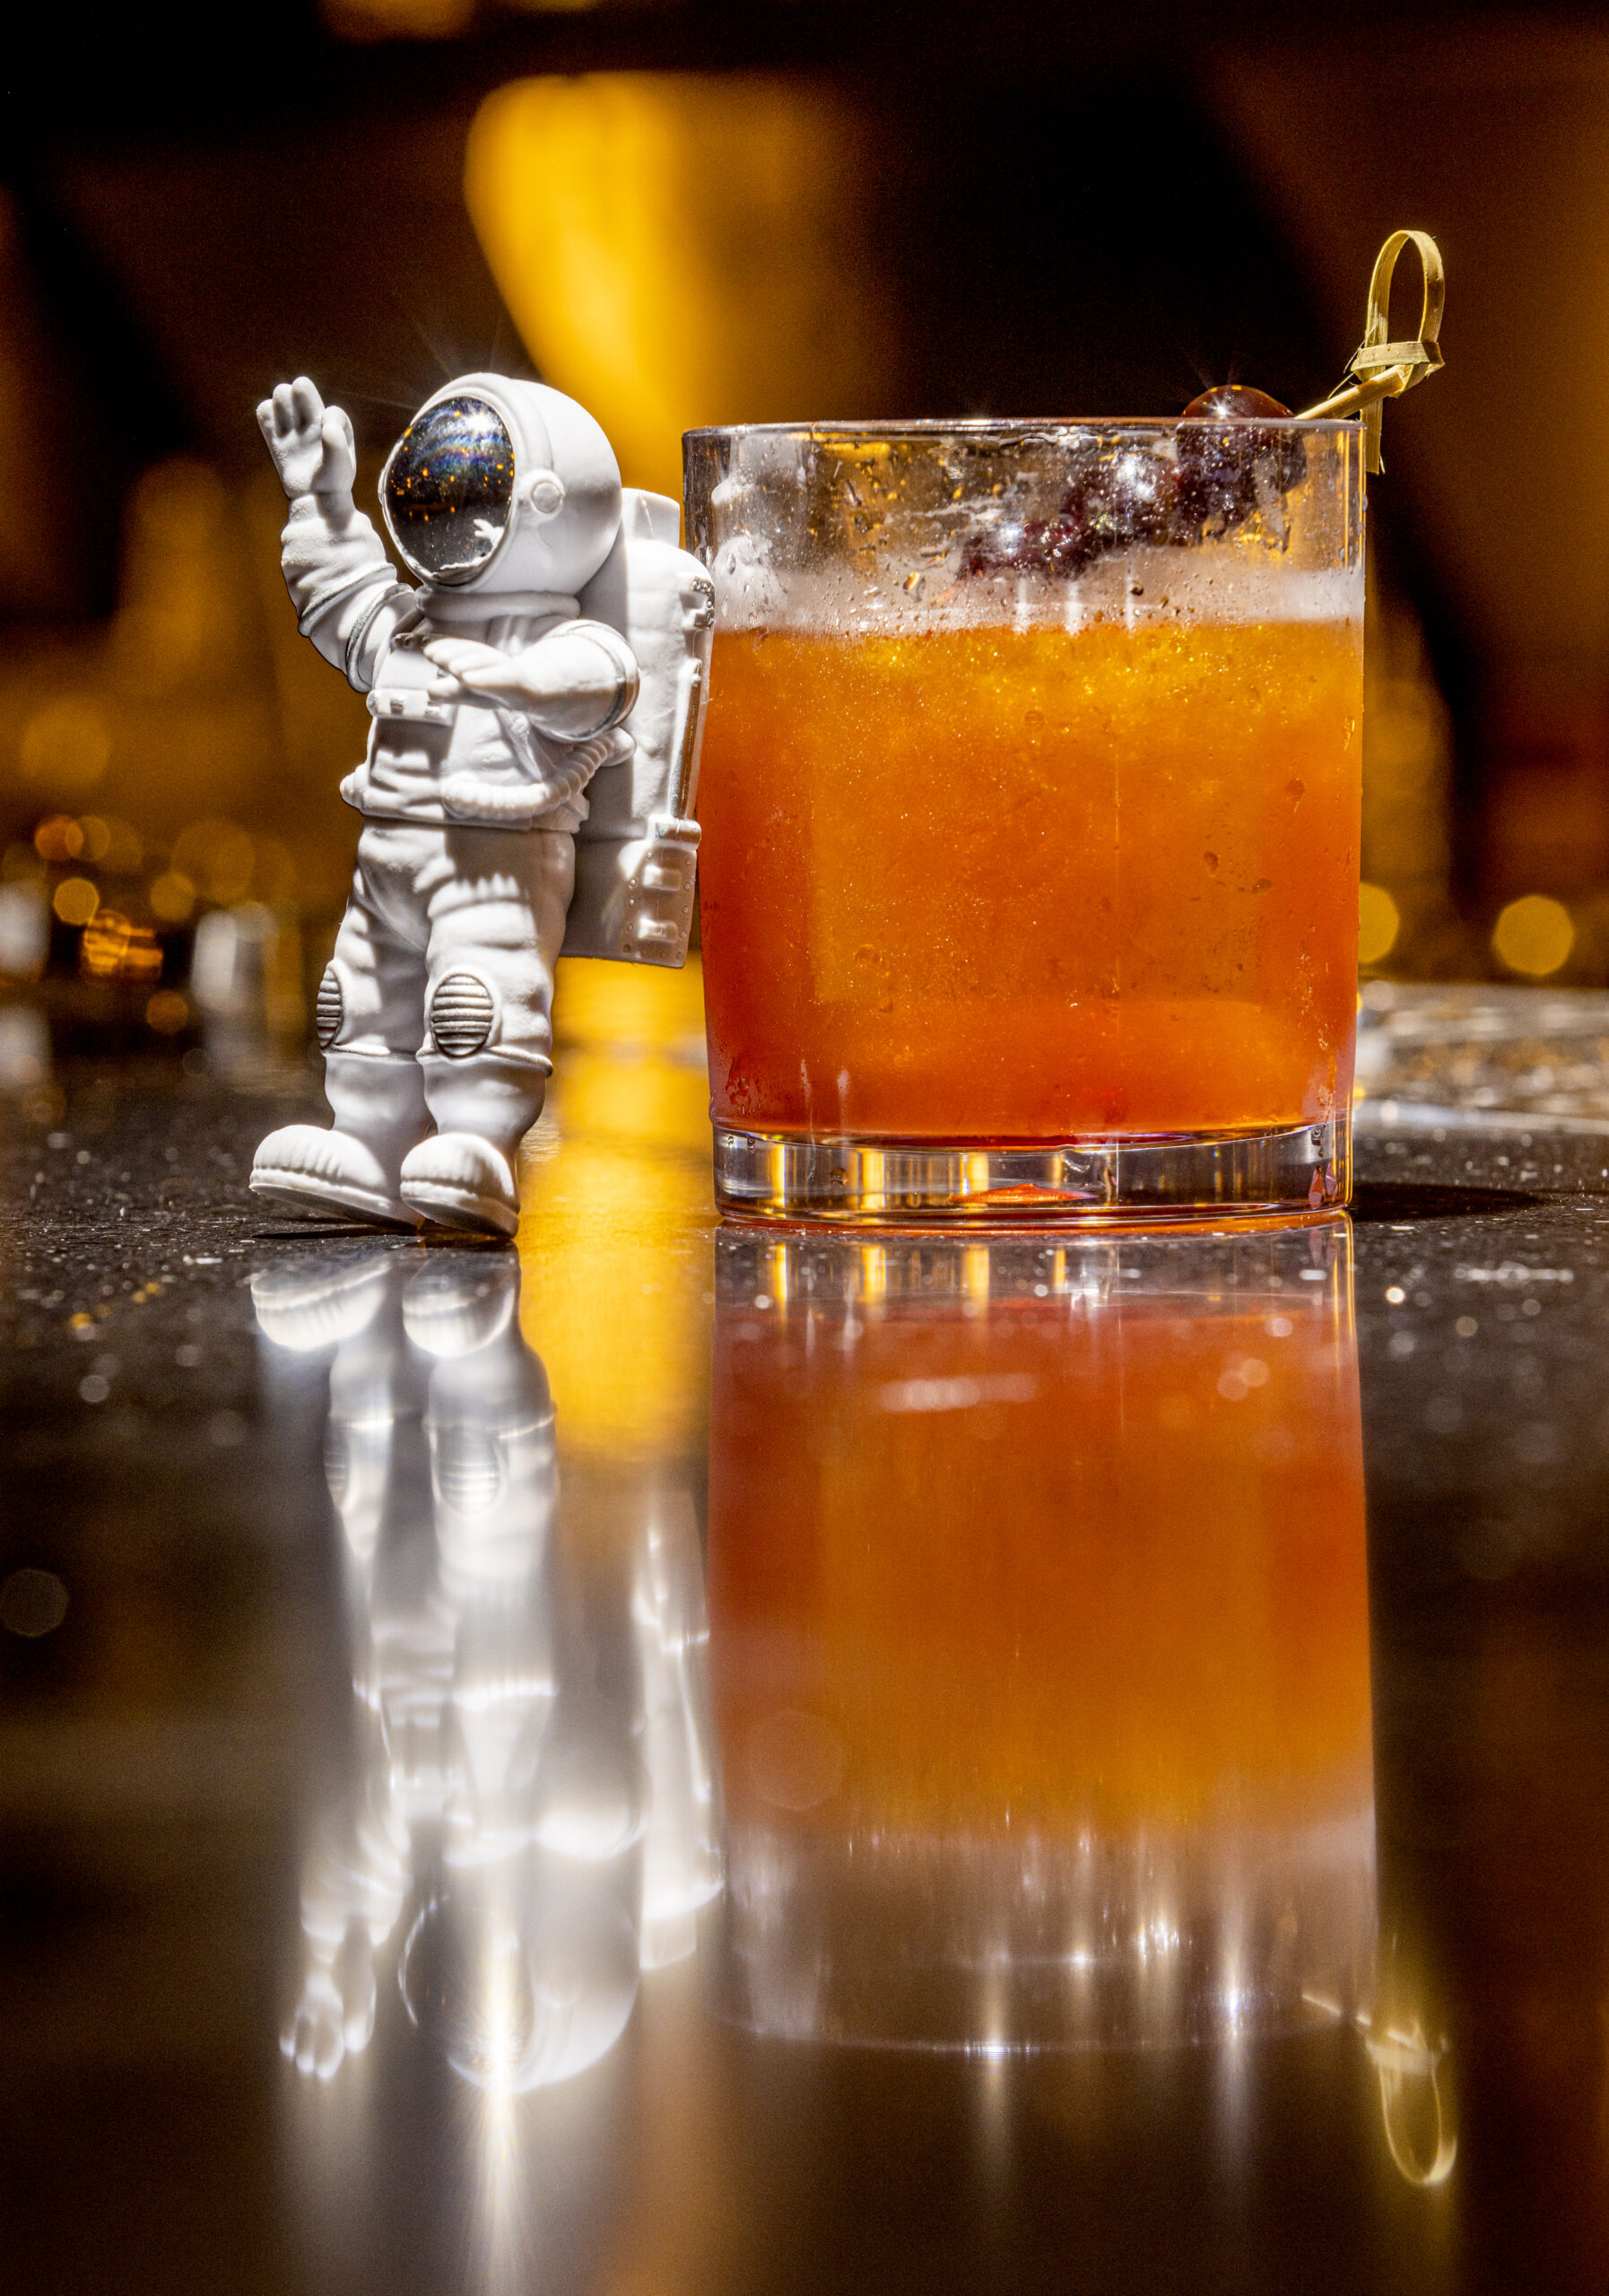 The Doctor Manhattan with bourbon, Amaro Nonino, and Luxardo from Vintage Space at The Flamingo Hotel in Santa Rosa Tuesday, August 23, 2022. (John Burgess/The Press Democrat)